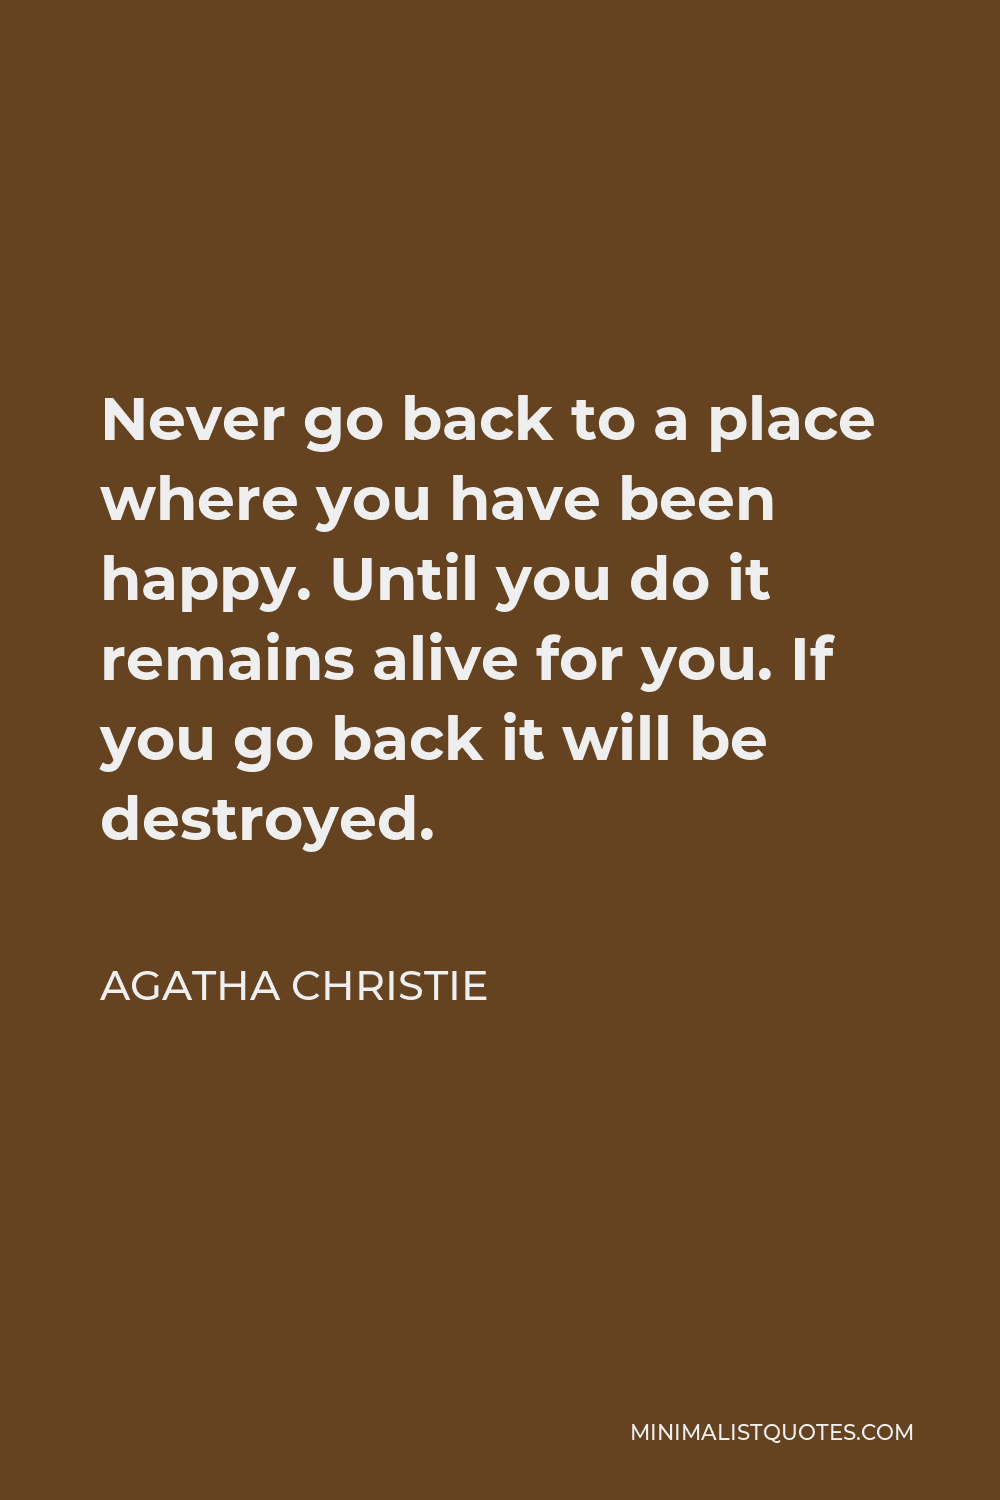 Agatha Christie Quote - Never go back to a place where you have been happy. Until you do it remains alive for you. If you go back it will be destroyed.